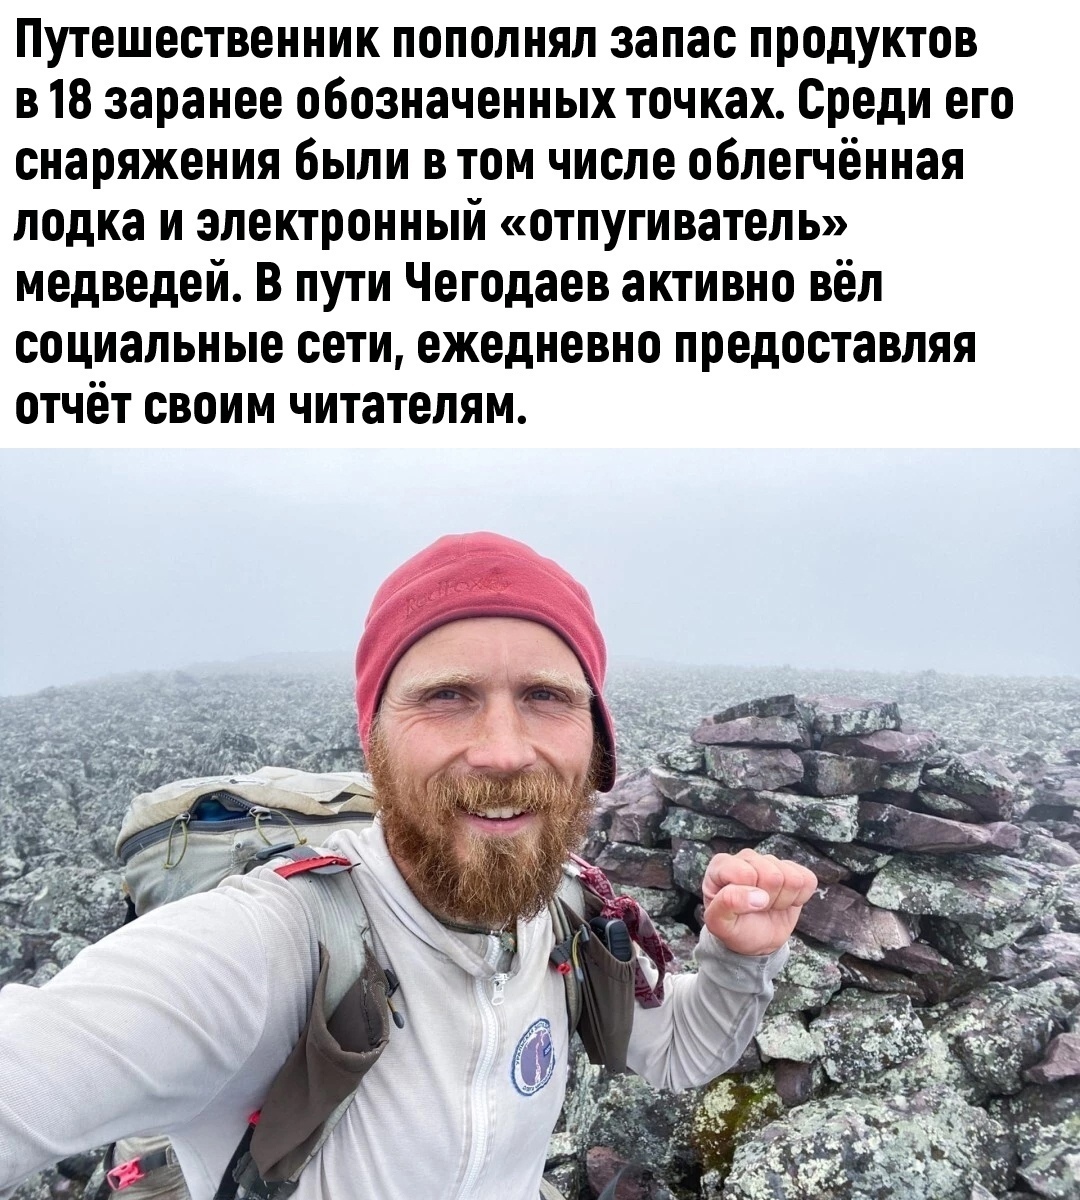 Ufimets for the first time in history passed the Ural Mountains - he spent 109 days on this - Mountain tourism, Tourism, Travels, Travel across Russia, Longpost, Ural, Picture with text